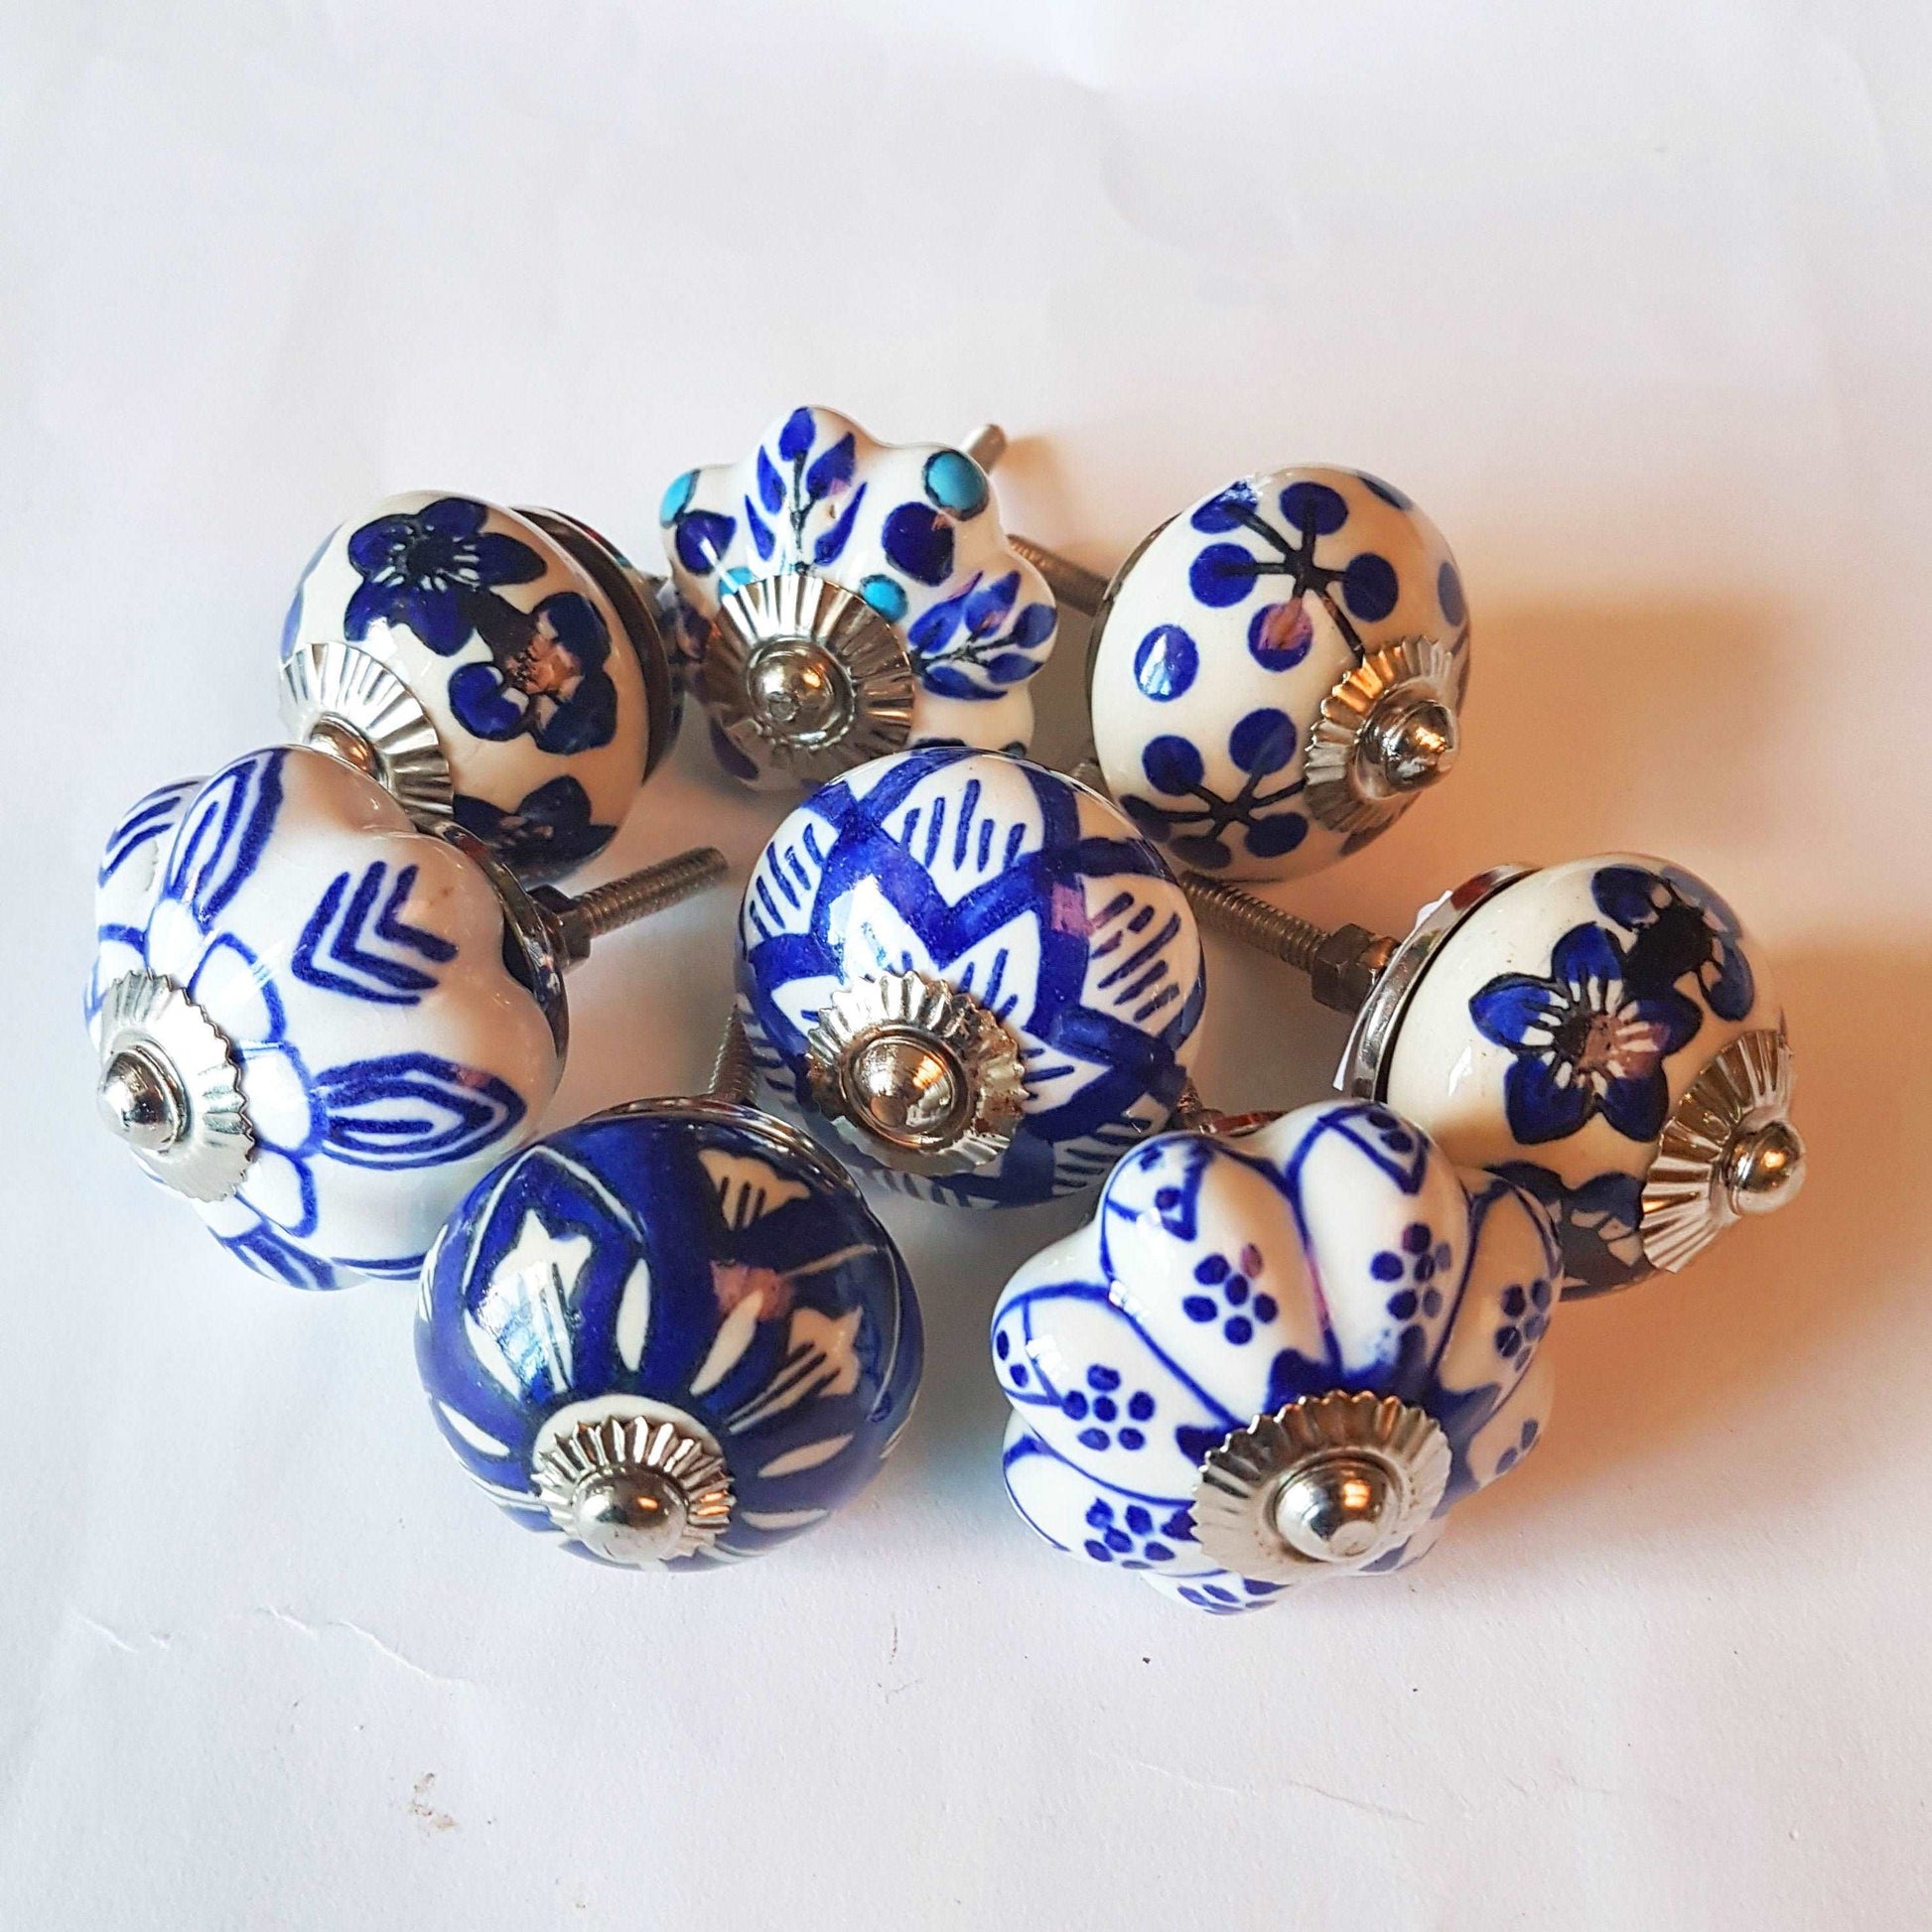 Ceramic cupboard-drawer knobs-pulls set of 8. Blue and white, unique hand painted floral designs. One and a half inch diameter. - Vintage India Ca